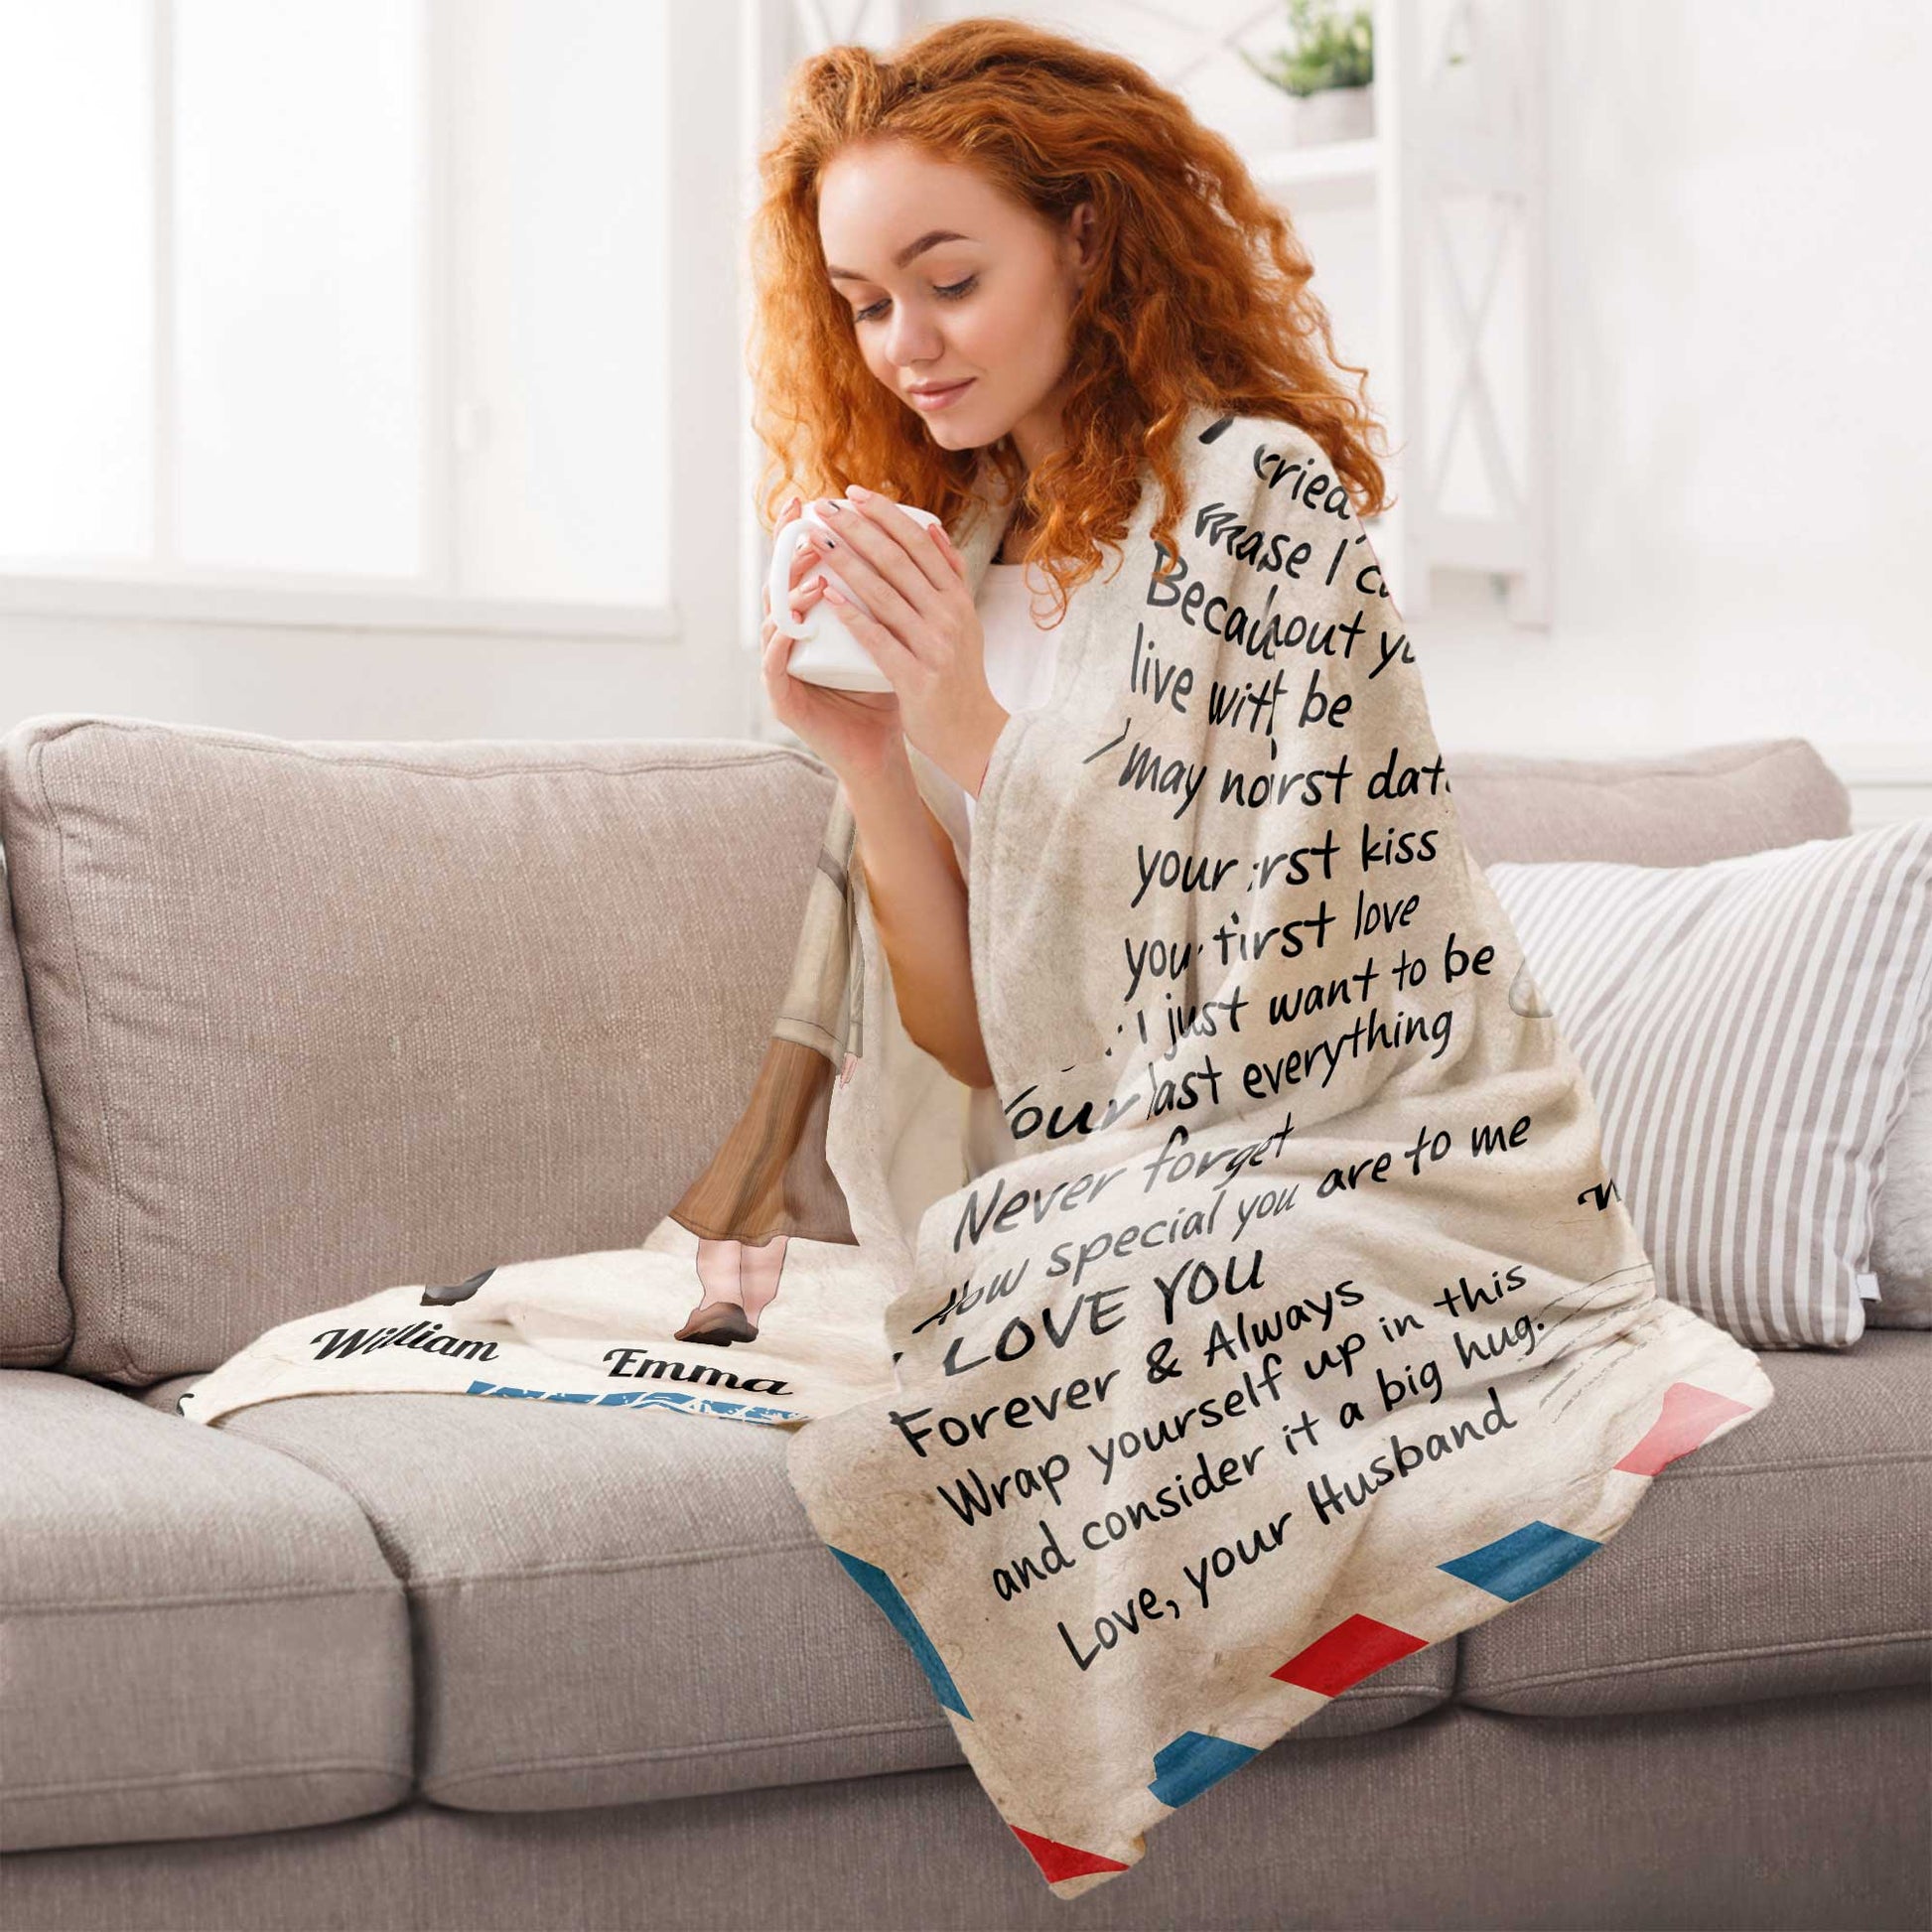 Wrap Yourself Up In This Blanket - Personalized Blanket - Birthday Anniversary Gift For Wife, Husband, Women, Men - Old Couple